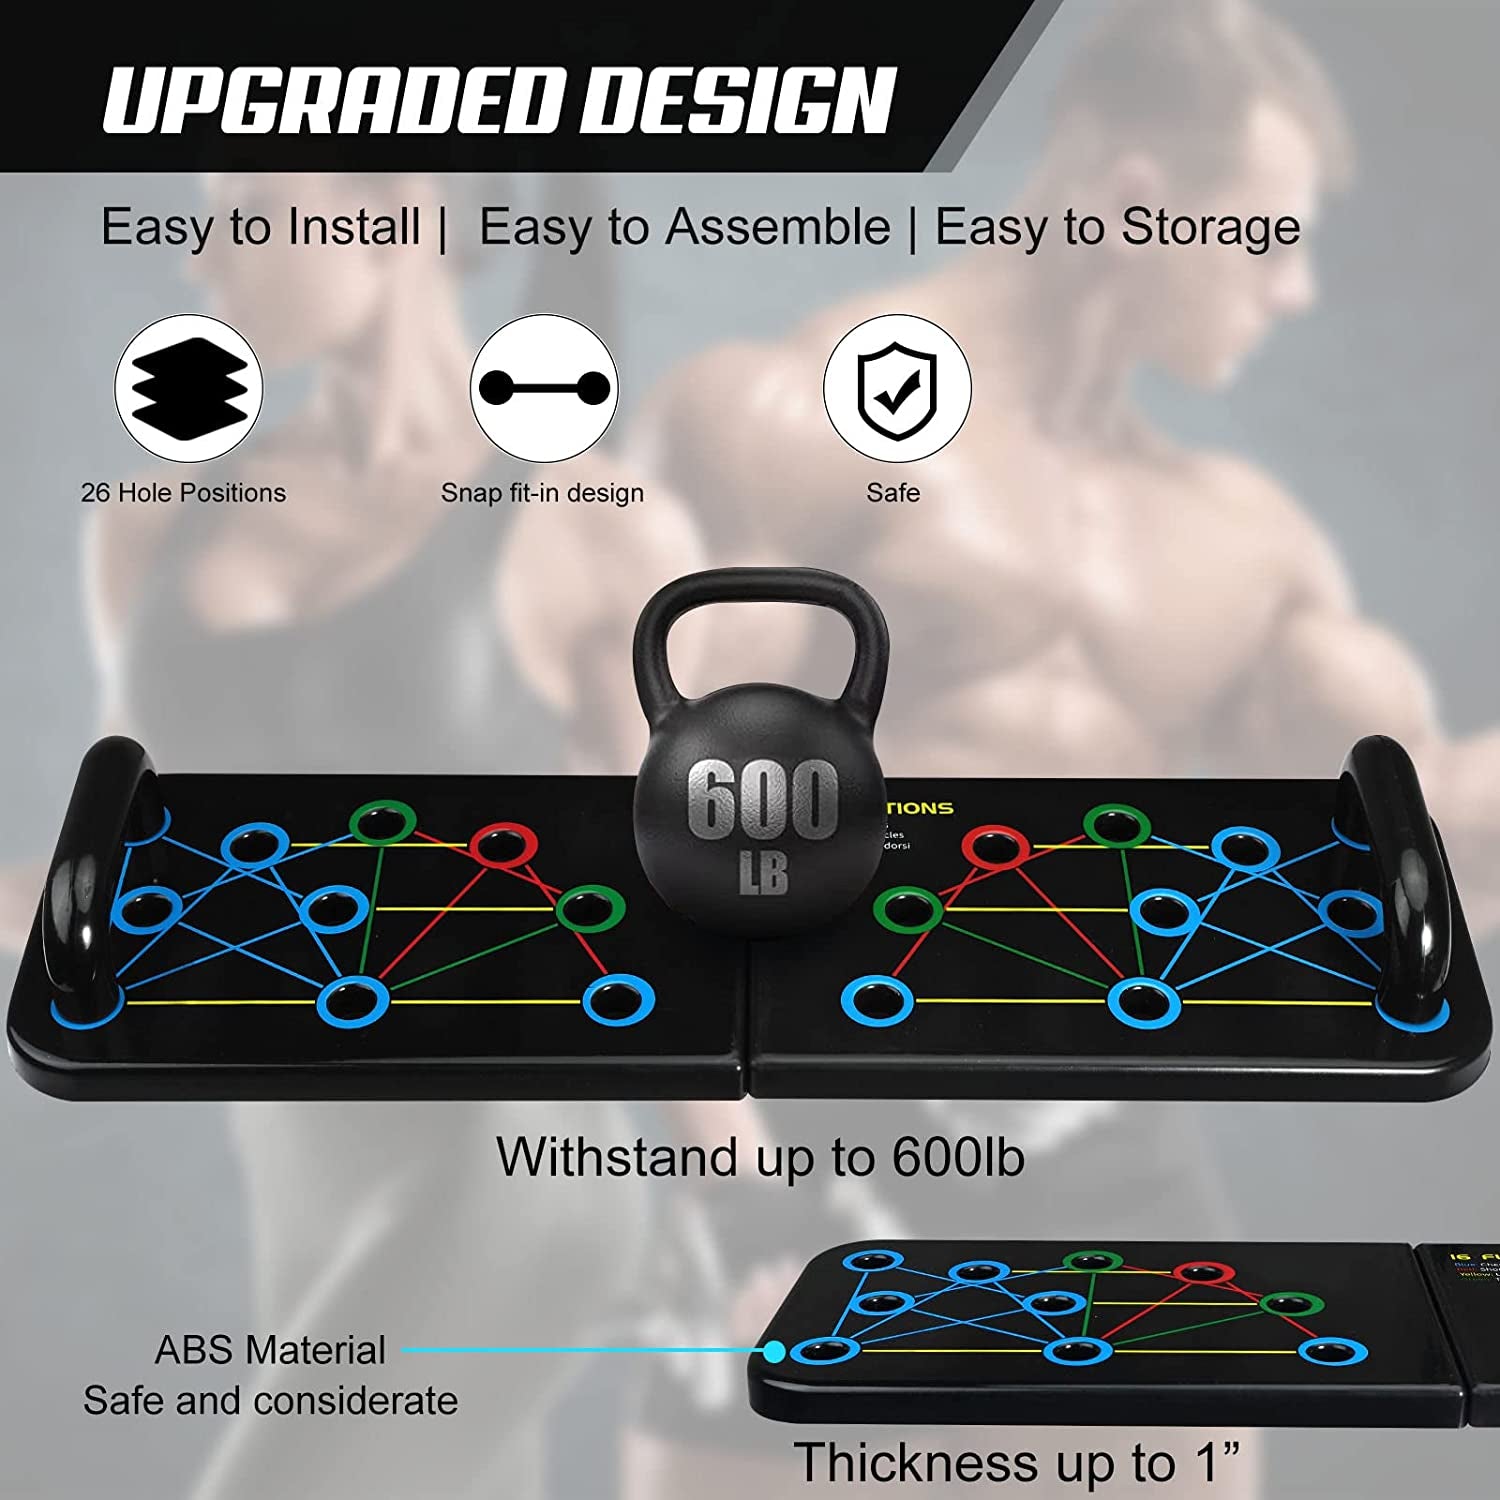 Portable Home Gym Equiptment: Push-Up Board, Pilates Exercise & 20 Fitness Accessories with Resistance Bands, Sit-Up Base, Ab Roller Wheel - Full Body Workout for Men and Women, Gift for Boyfriend